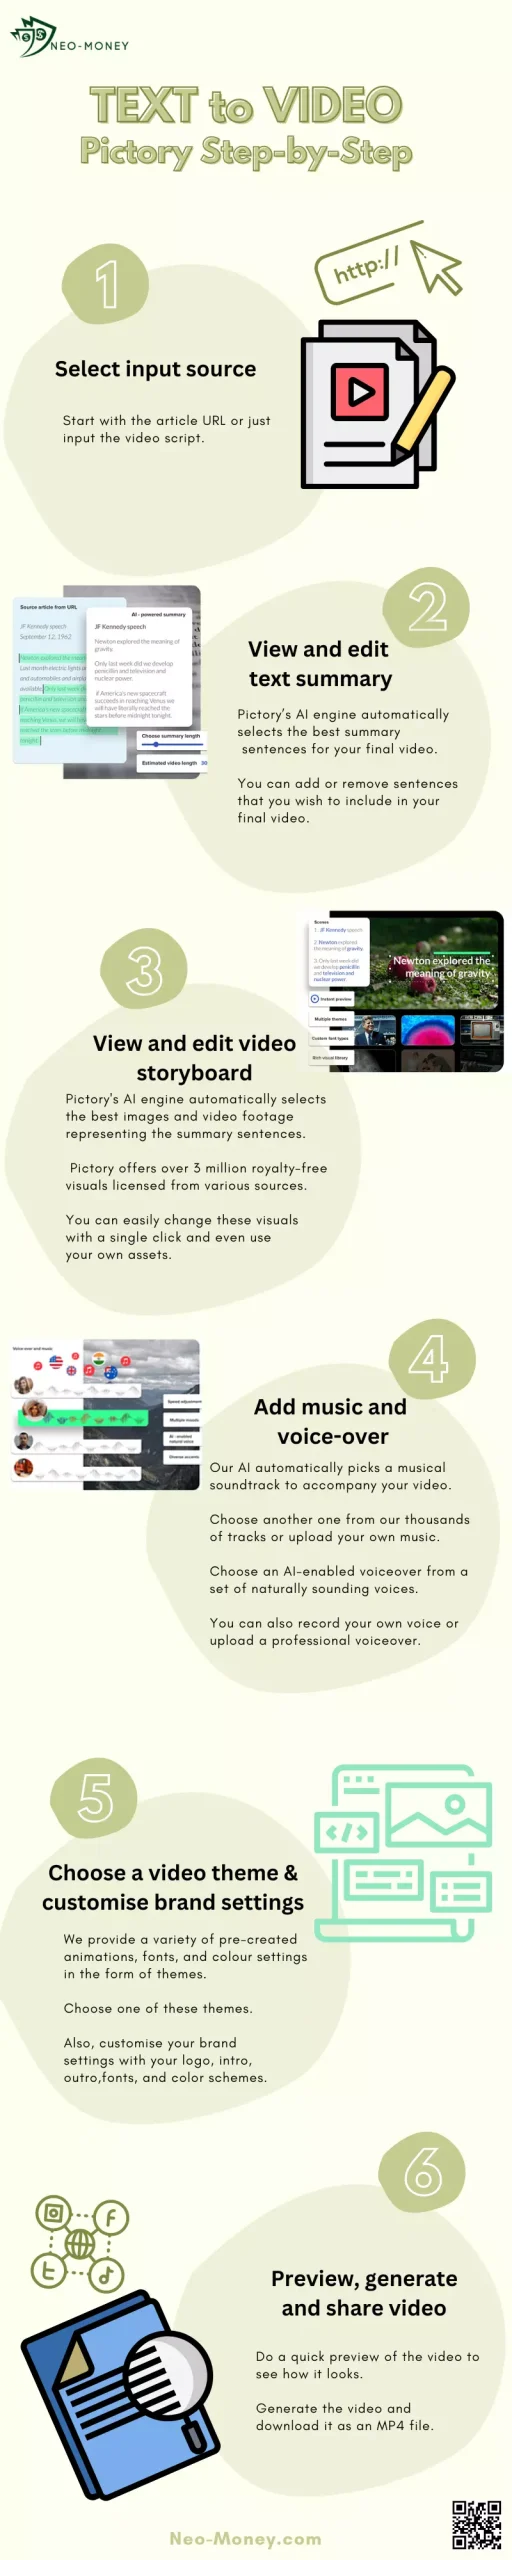 image of infographic Faceless youtube video step-by-step pictory tutorial